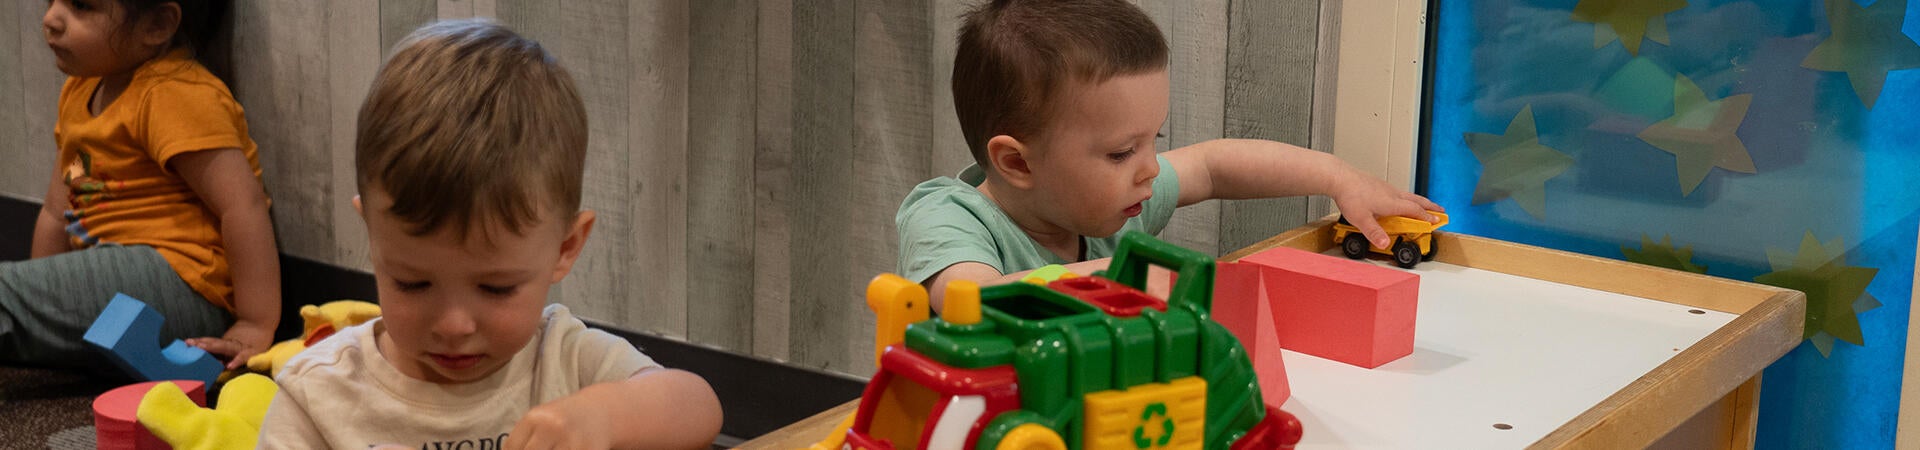 two toddlers playing with cars at table